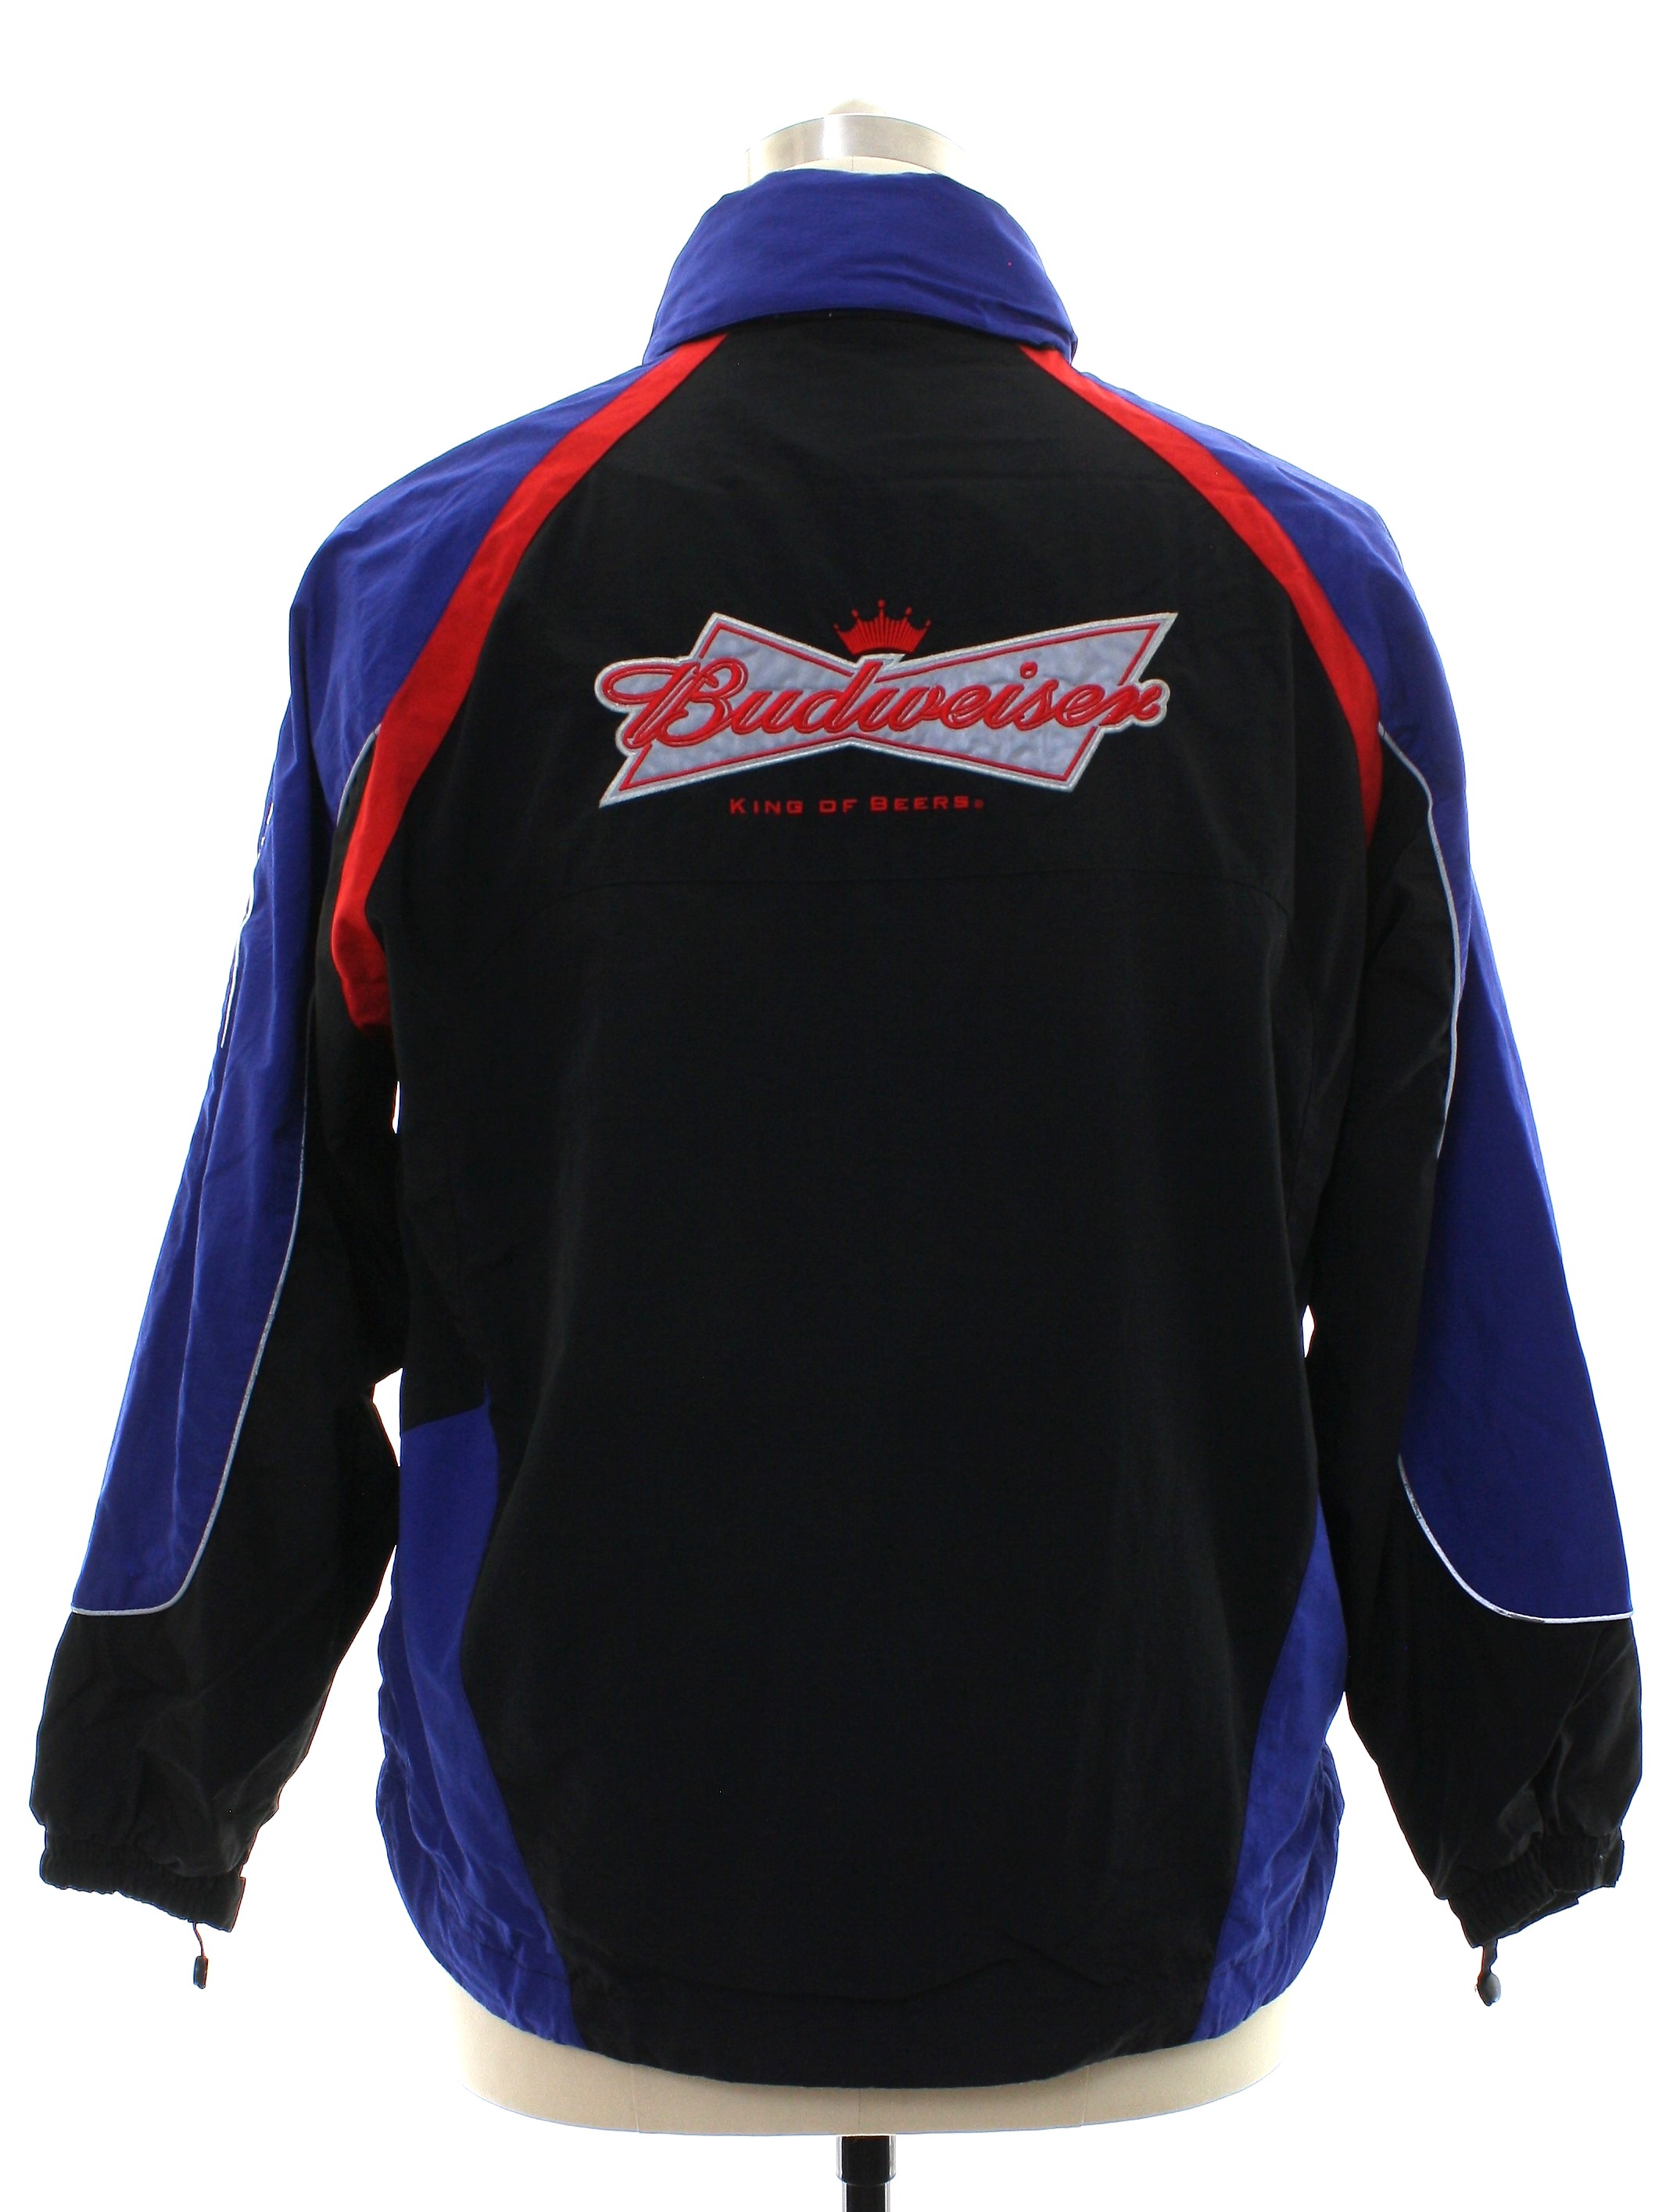 1990's Retro Jacket: 90s -Budweiser, Staples Promotional Products- Mens ...